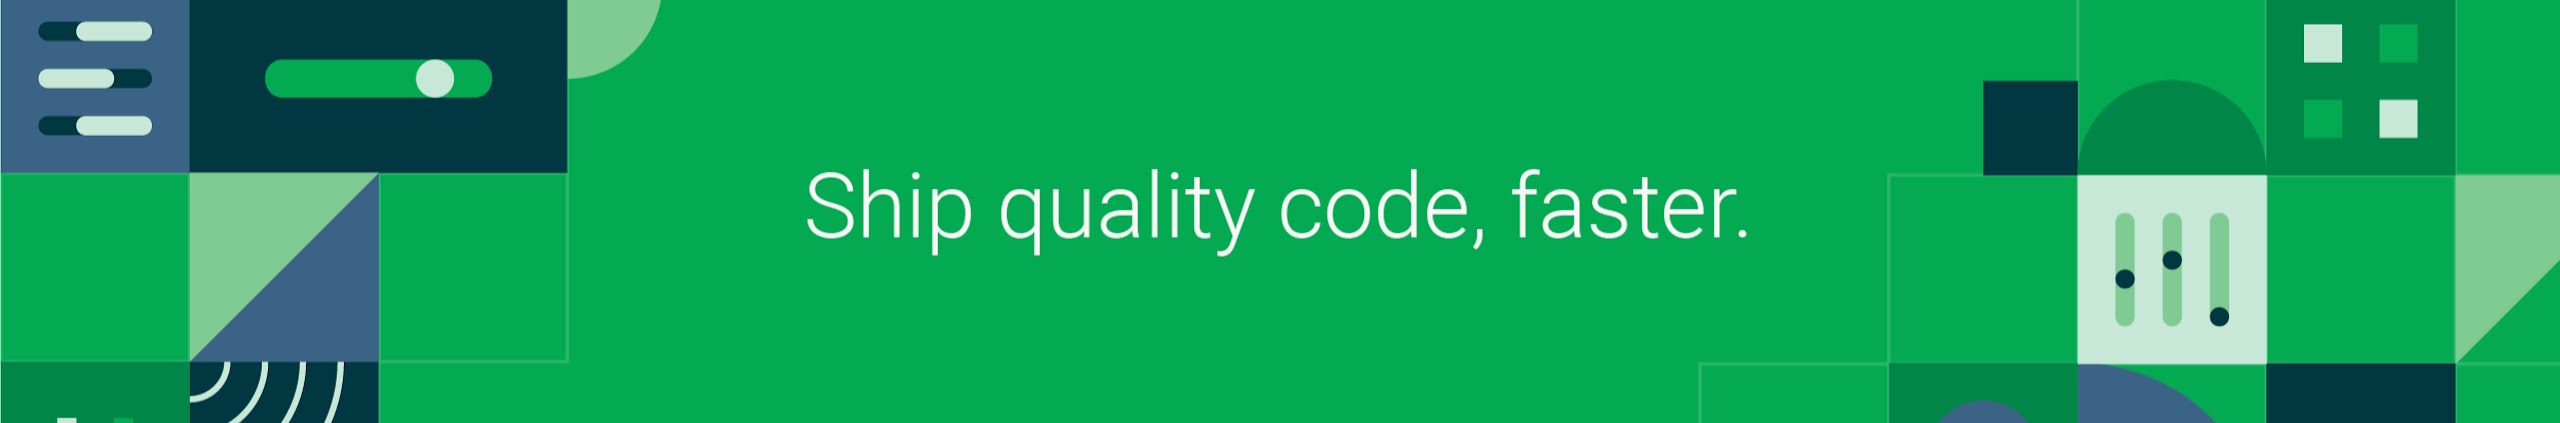 An illustration of geometric shapes colored in green and the phrase: "Ship quality code, faster".